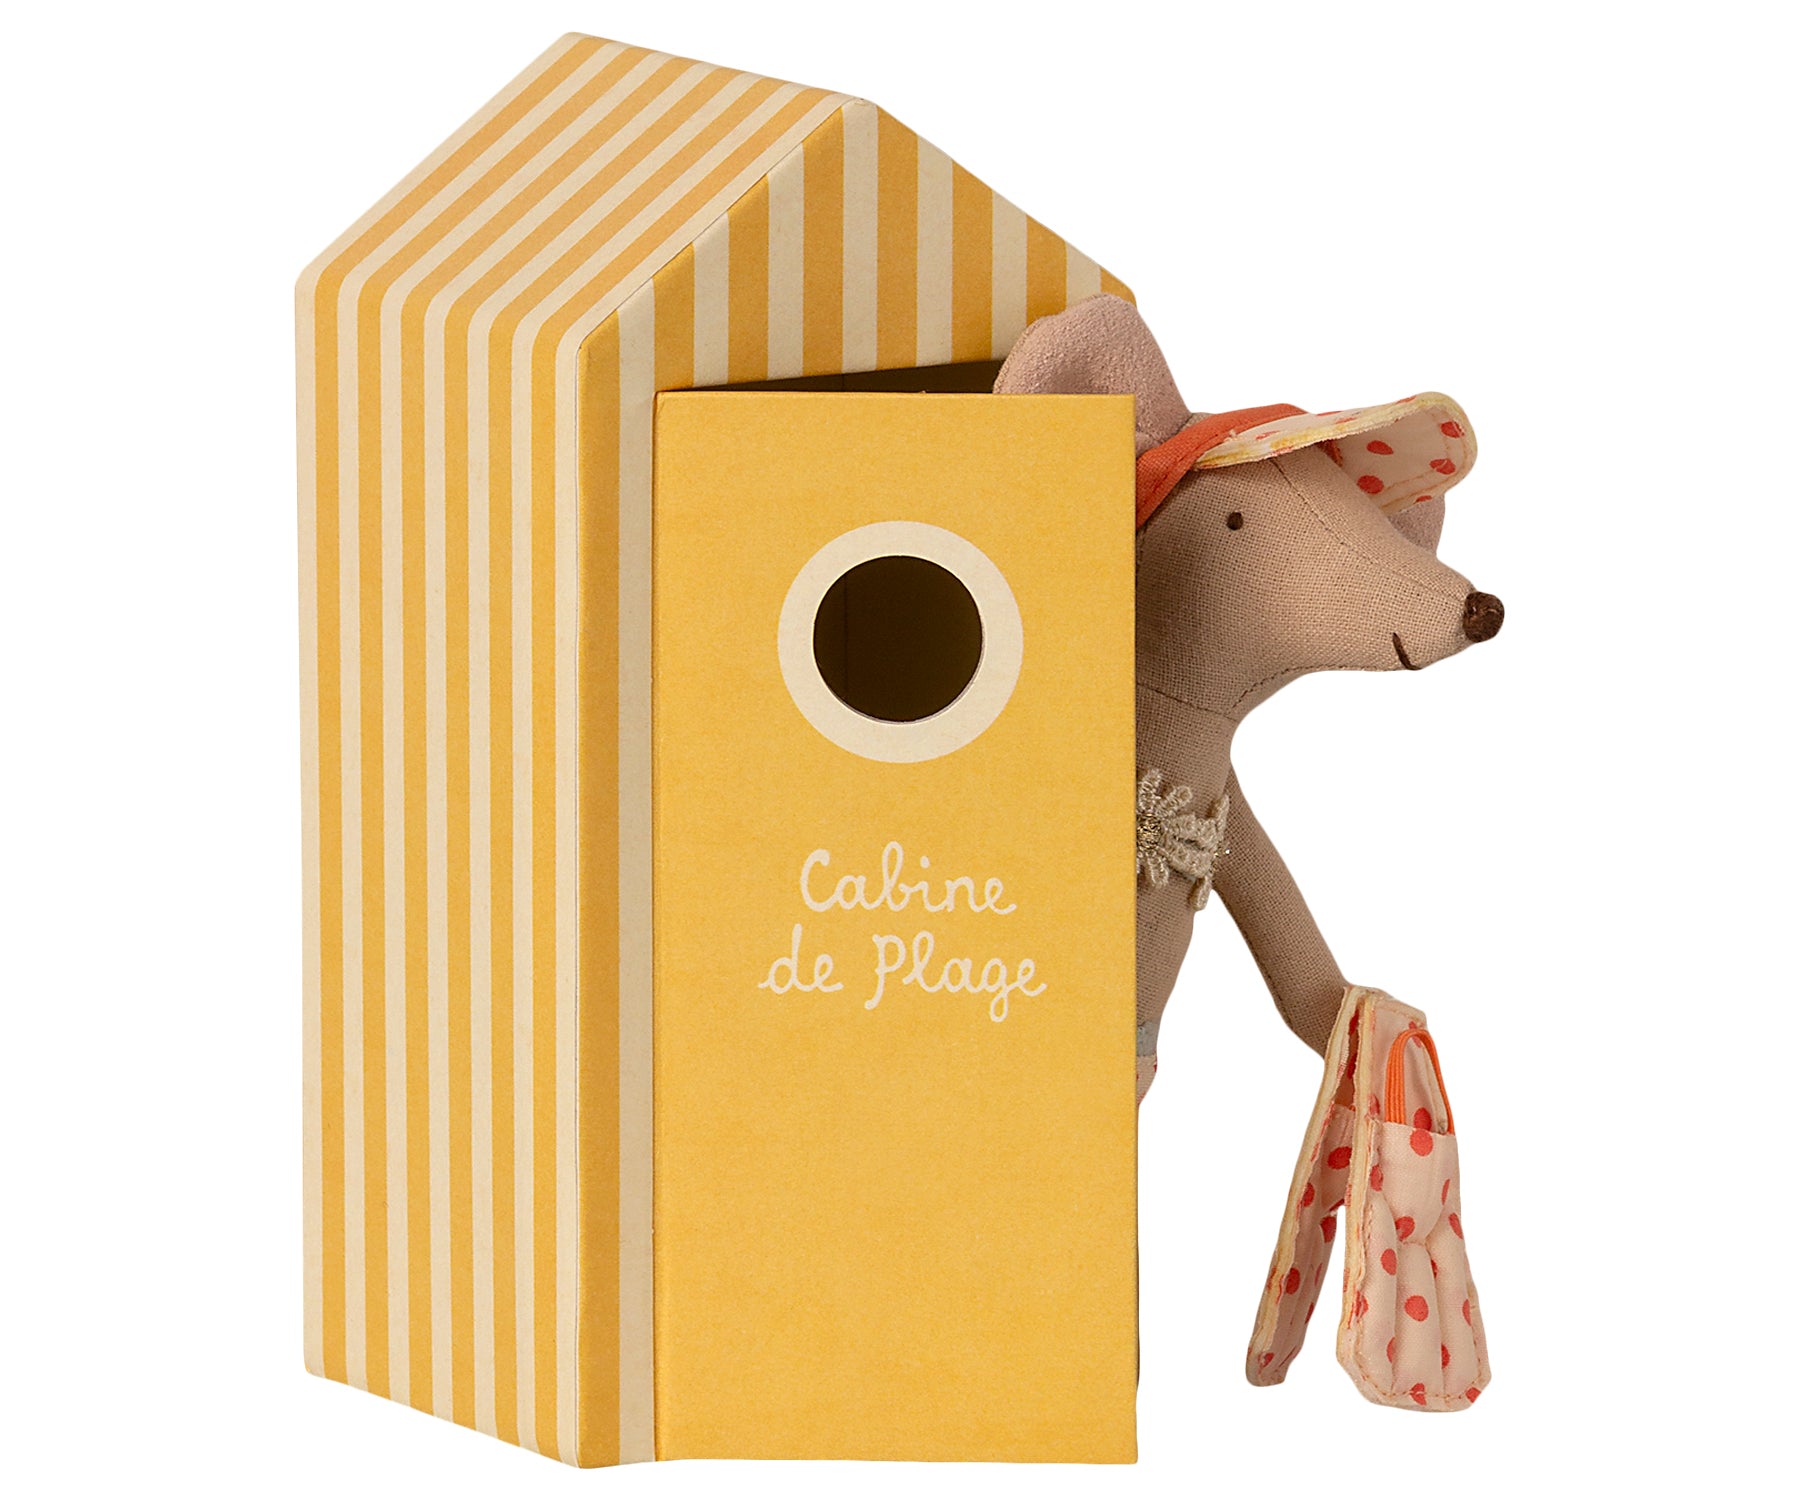 Maileg Beach Mouse in Cabin de Plage – Big Sister